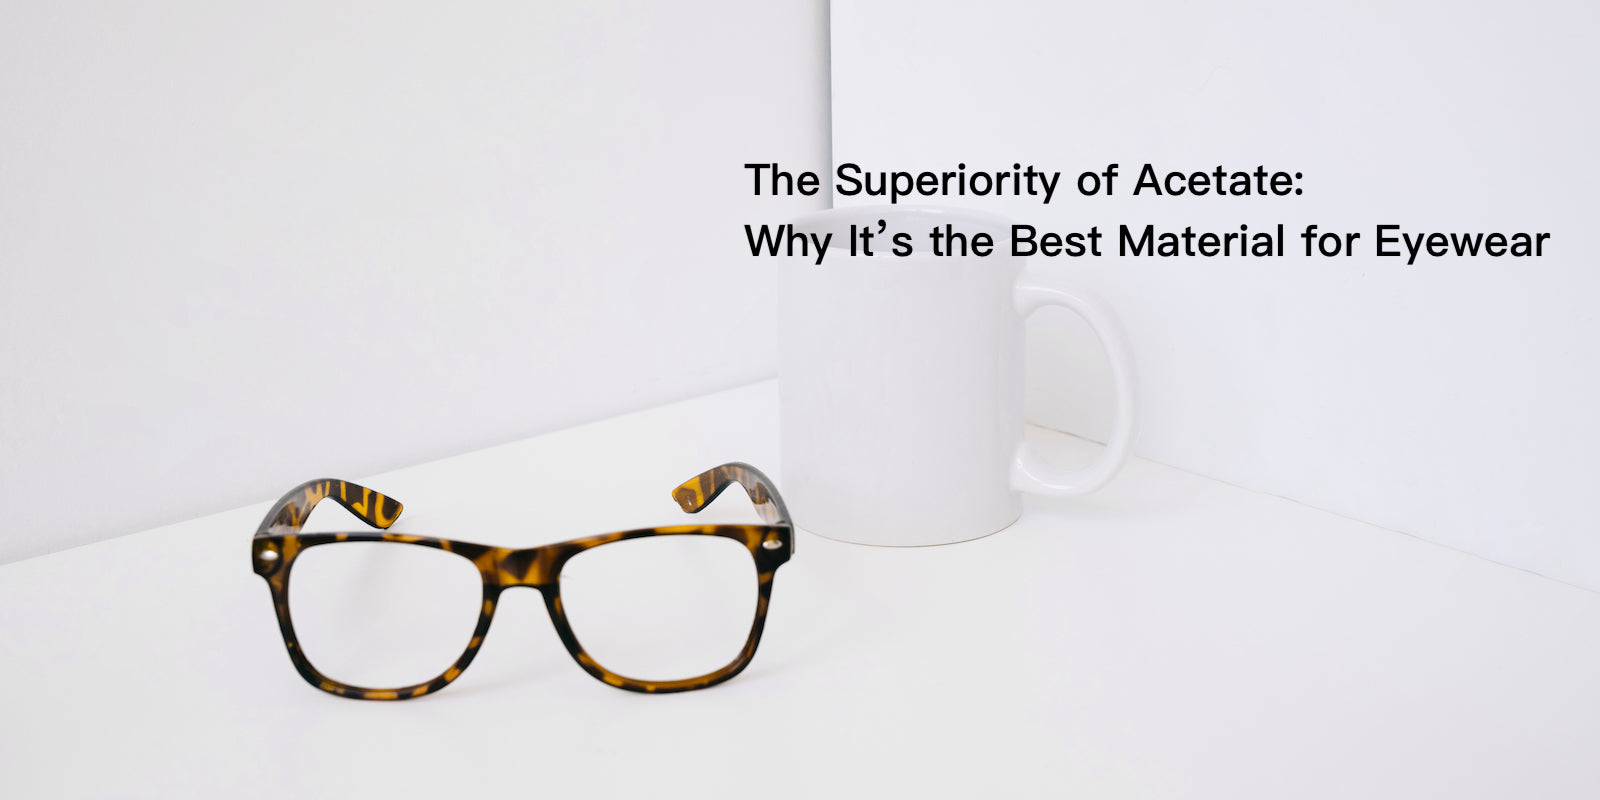 The Superiority of Acetate: Why It’s the Best Material for Eyewear